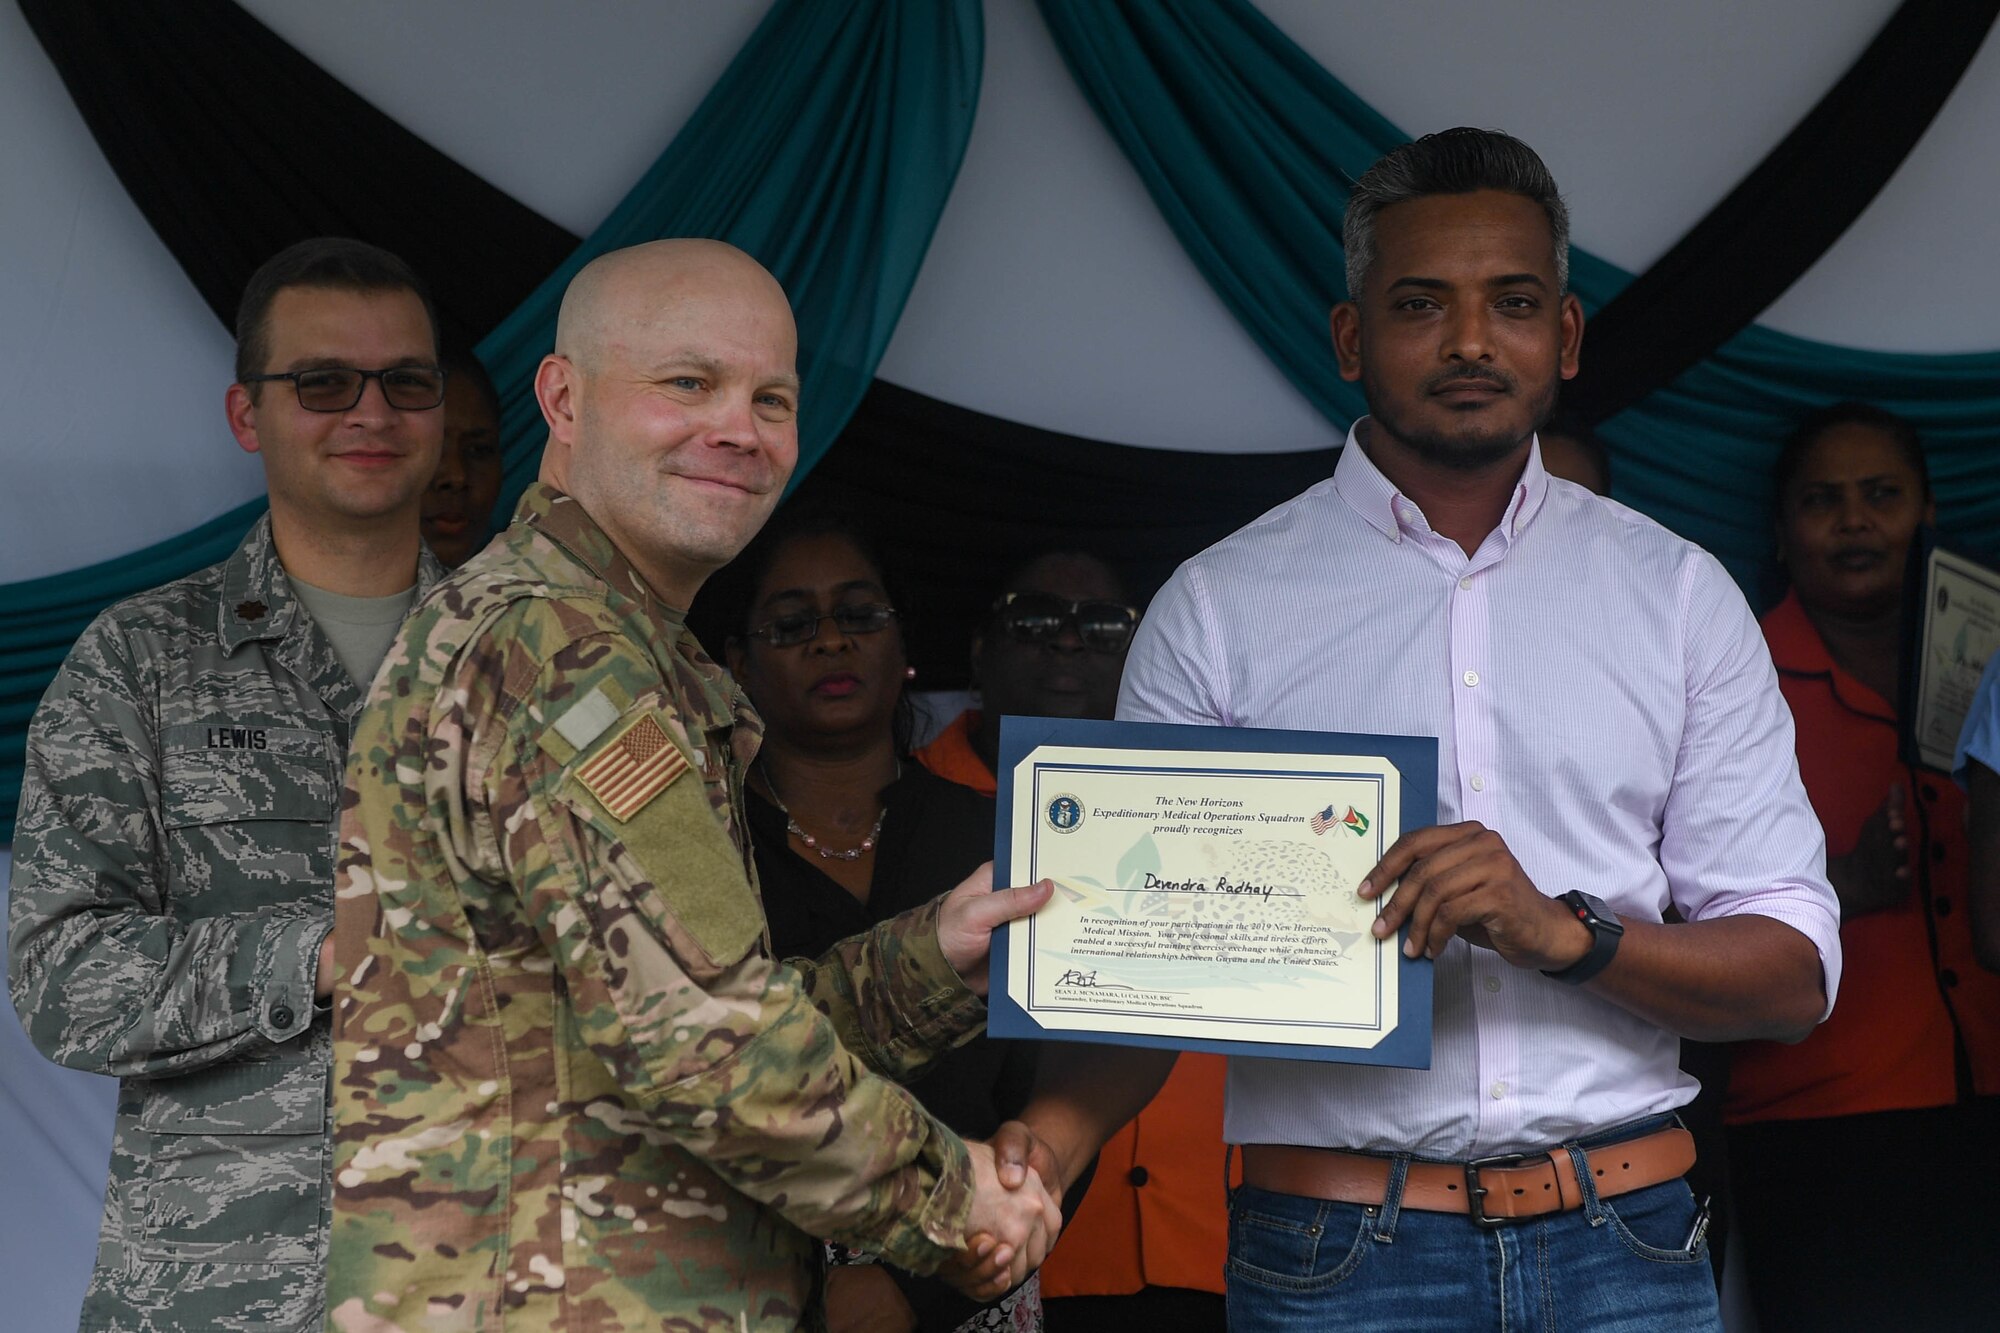 U.S. Air Force Lt. Col. Sean McNamara, Air Force Office of the Surgeon General, Falls Church, Virginia, presents Dr. Devendra Radhy, Port Mourant Hospital doctor in charge, with a certificate of appreciation during the closing ceremony of the ophthalmology center during New Horizons exercise 2019 at Port Mourant, Guyana, May 16, 2019. The ophthalmology clinic was established to provide aid to the Guyanese population by screening and selecting patients to receive cataract surgery in support of New Horizons 2019. The New Horizons exercise 2019 provides U.S. military members an opportunity to train for an overseas deployment and the logistical requirements it entails. The exercise promotes bilateral cooperation by providing opportunities for U.S. and partner nation military engineers, medical personnel and support staff to work and train side by side.(U.S. Air Force photo by Senior Airman Derek Seifert)